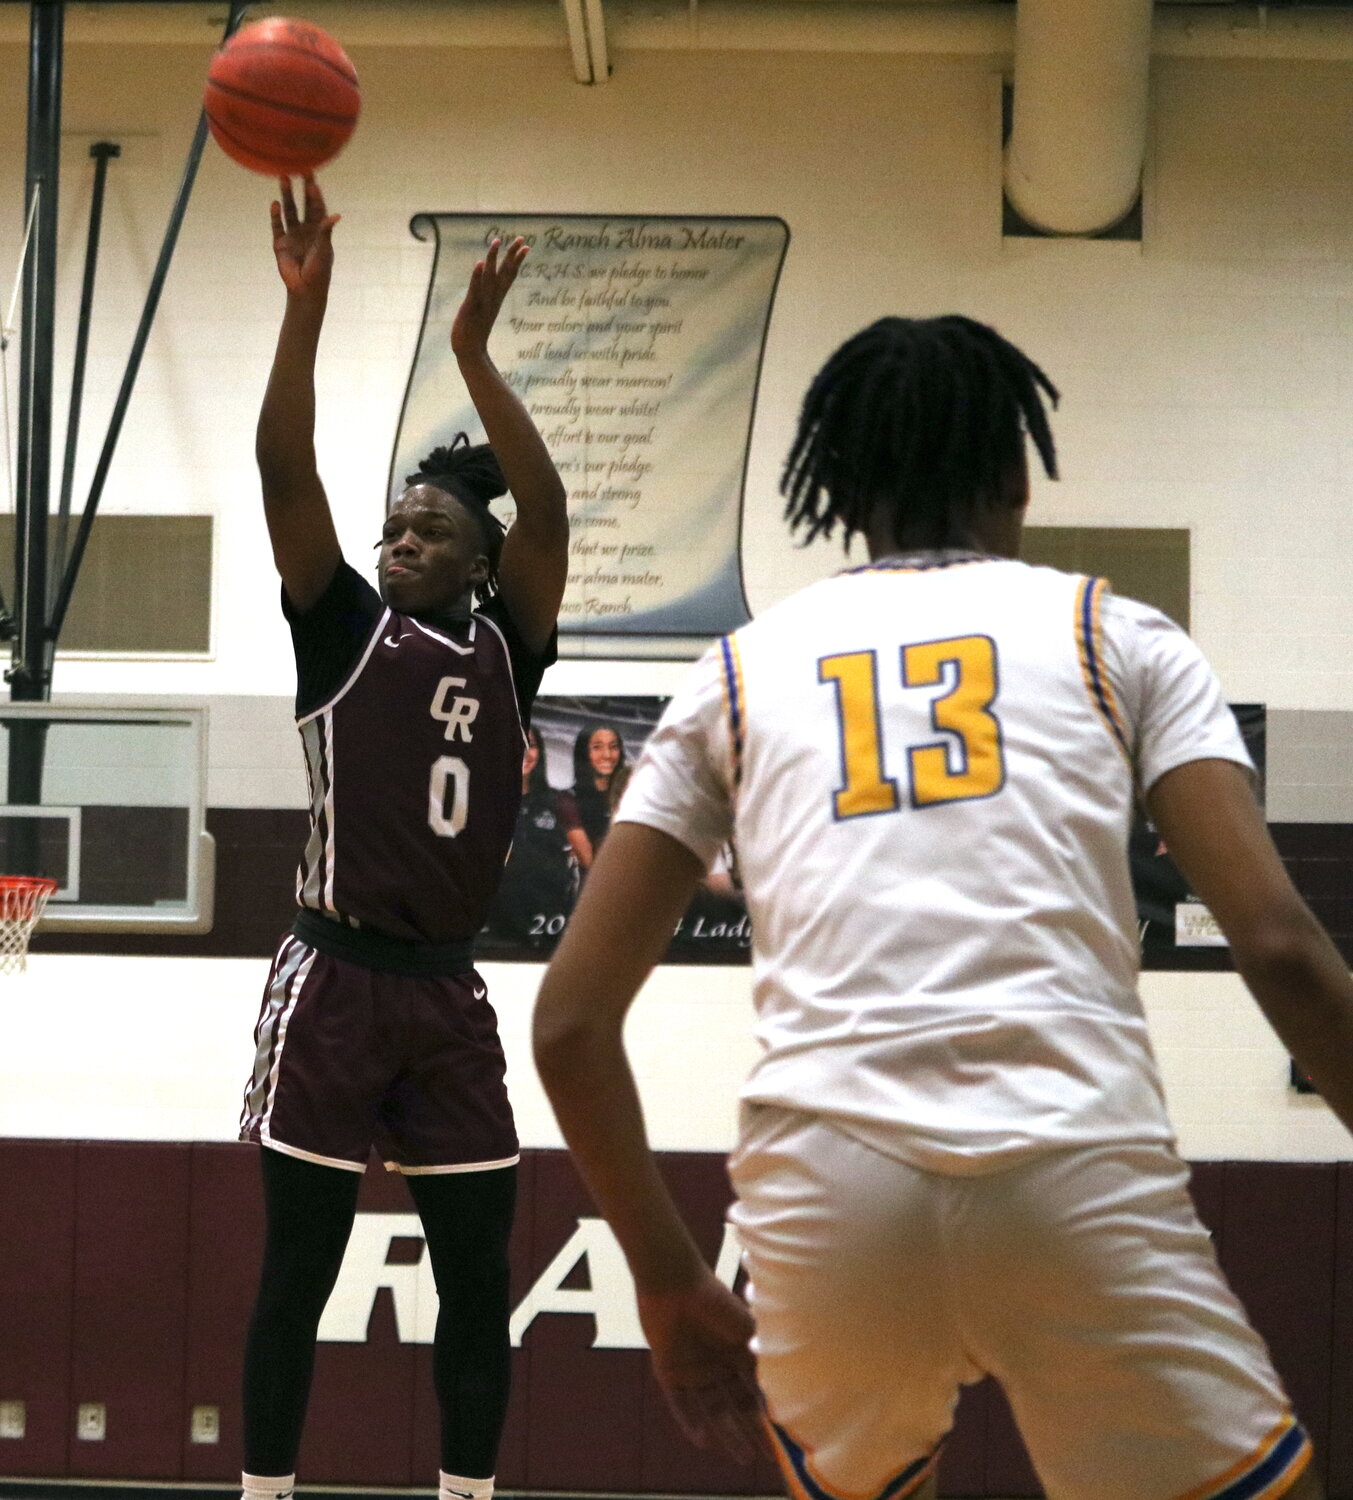 Prince Jones-Bynum shoots a jumper during Friday's game between Cinco Ranch and Klein at the Cinco Ranch gym.